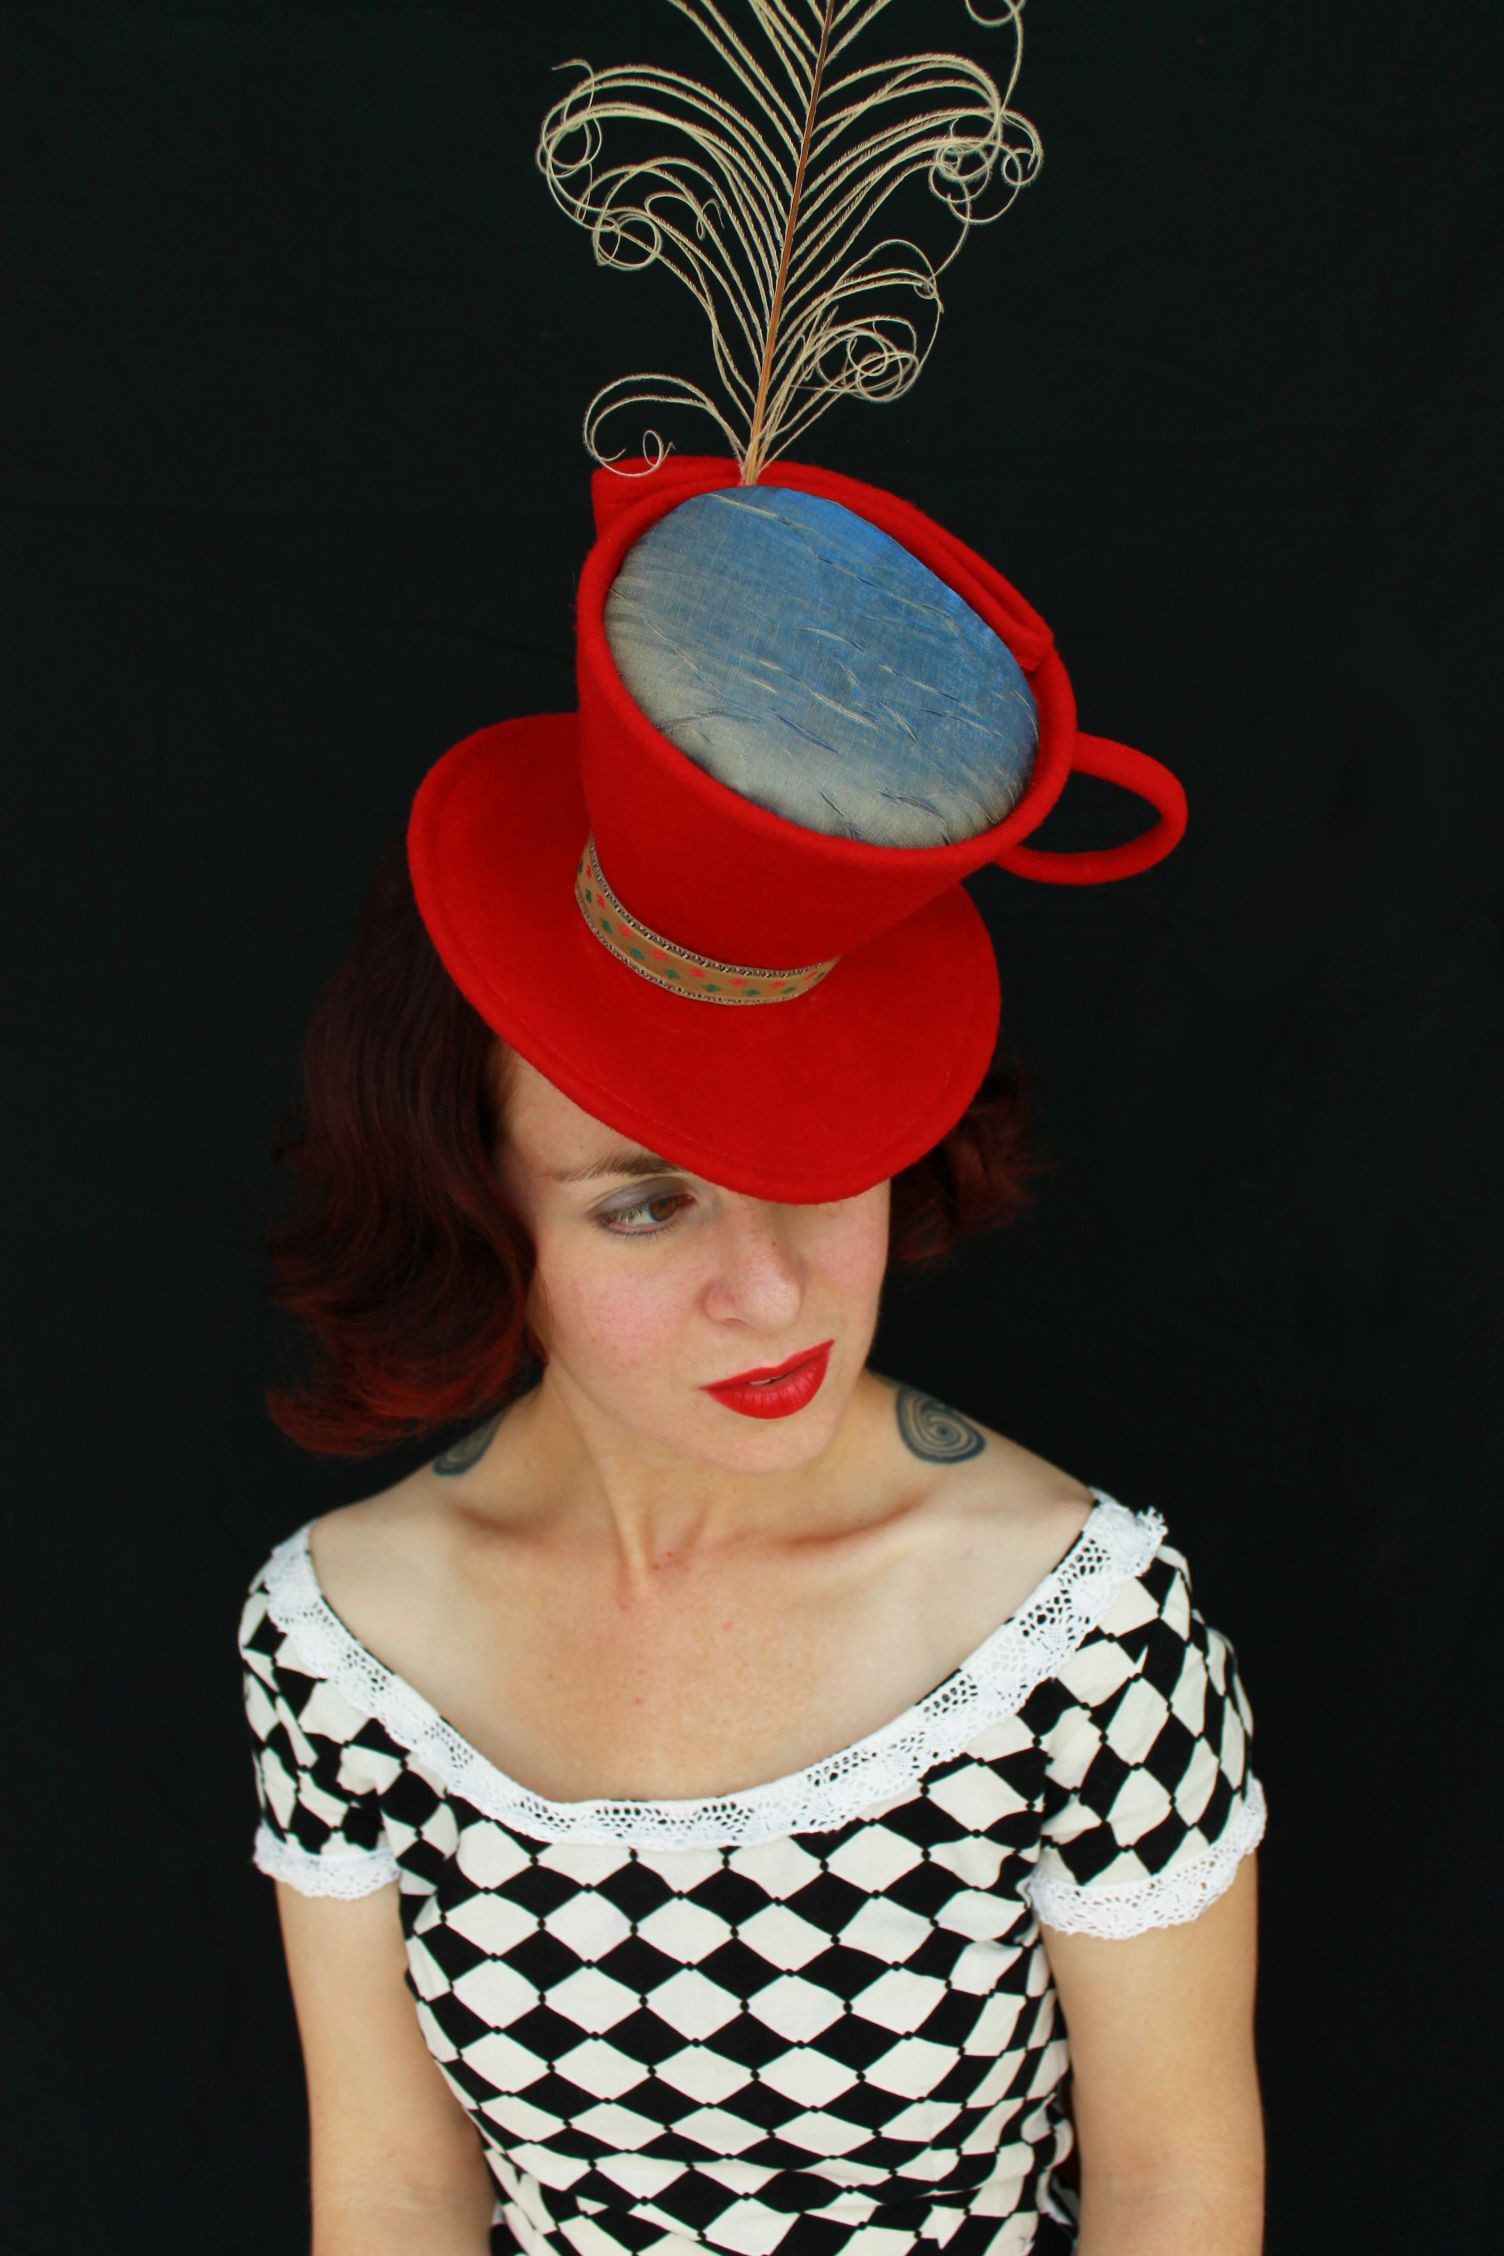 Mad Hatter Tea Party Hats Ideas
 Mad Hatter tea cup in red felt